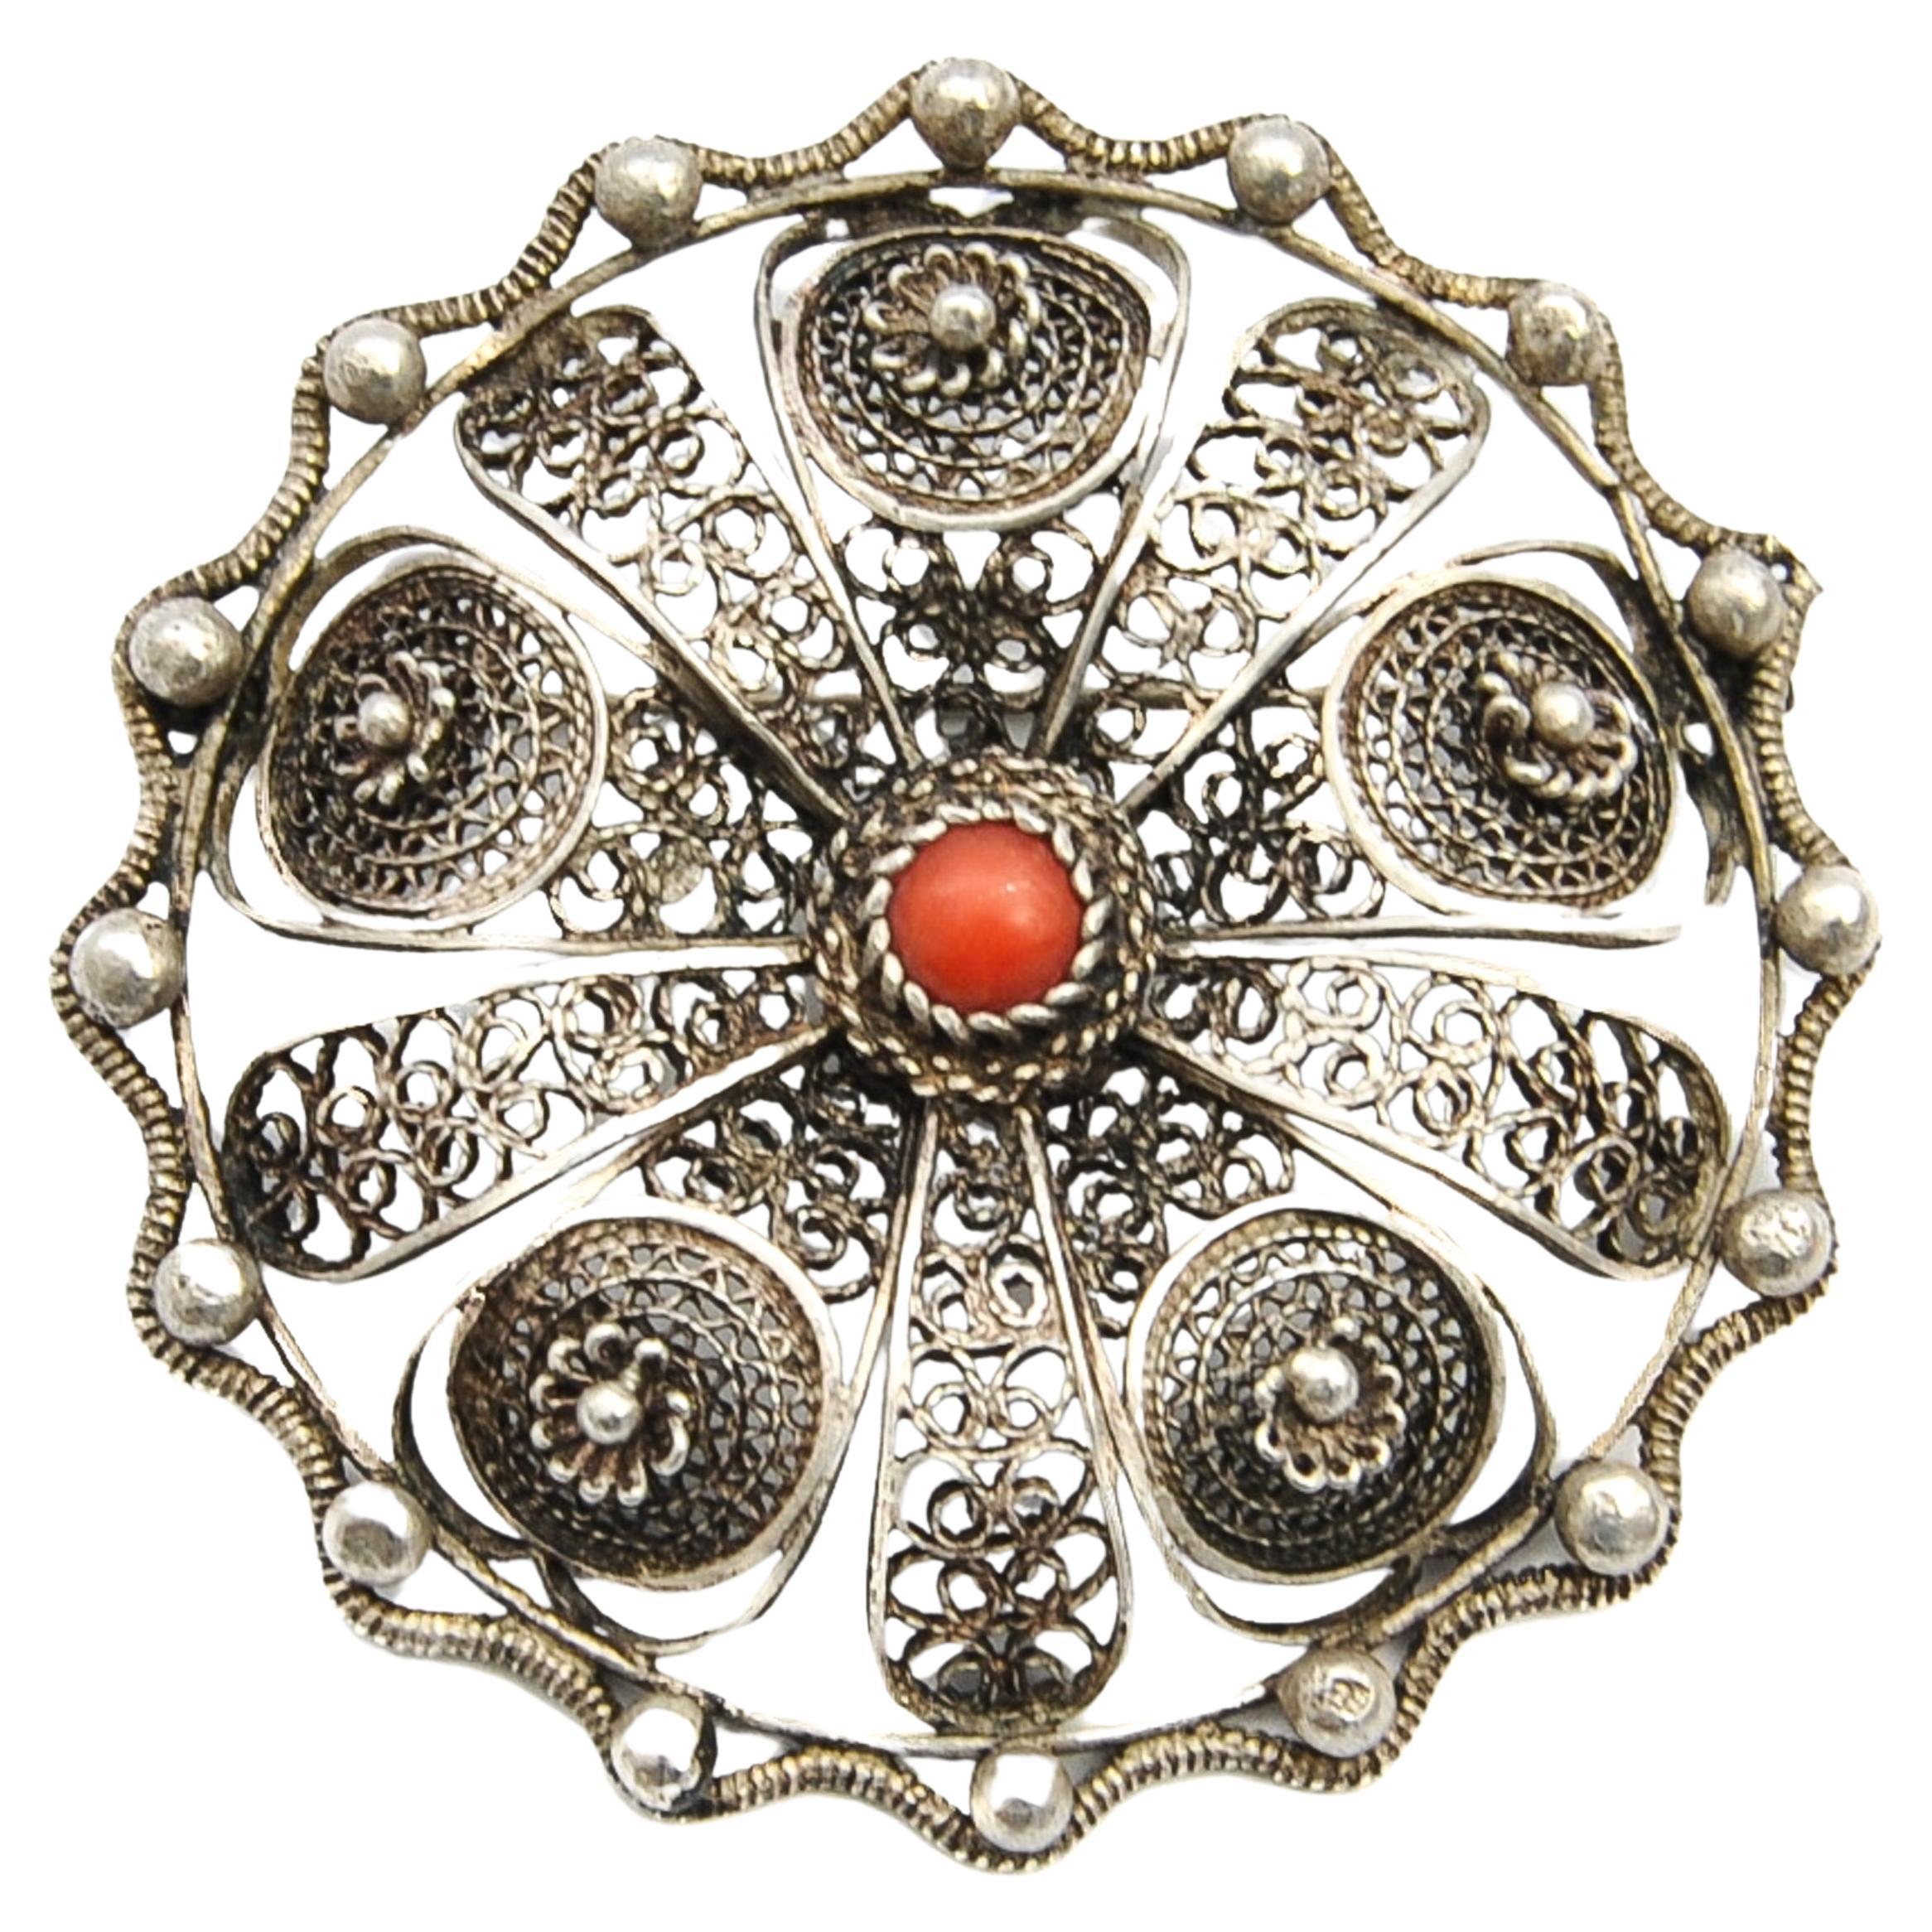 Vintage Silver Filigree and Coral Lapel Pin Brooch